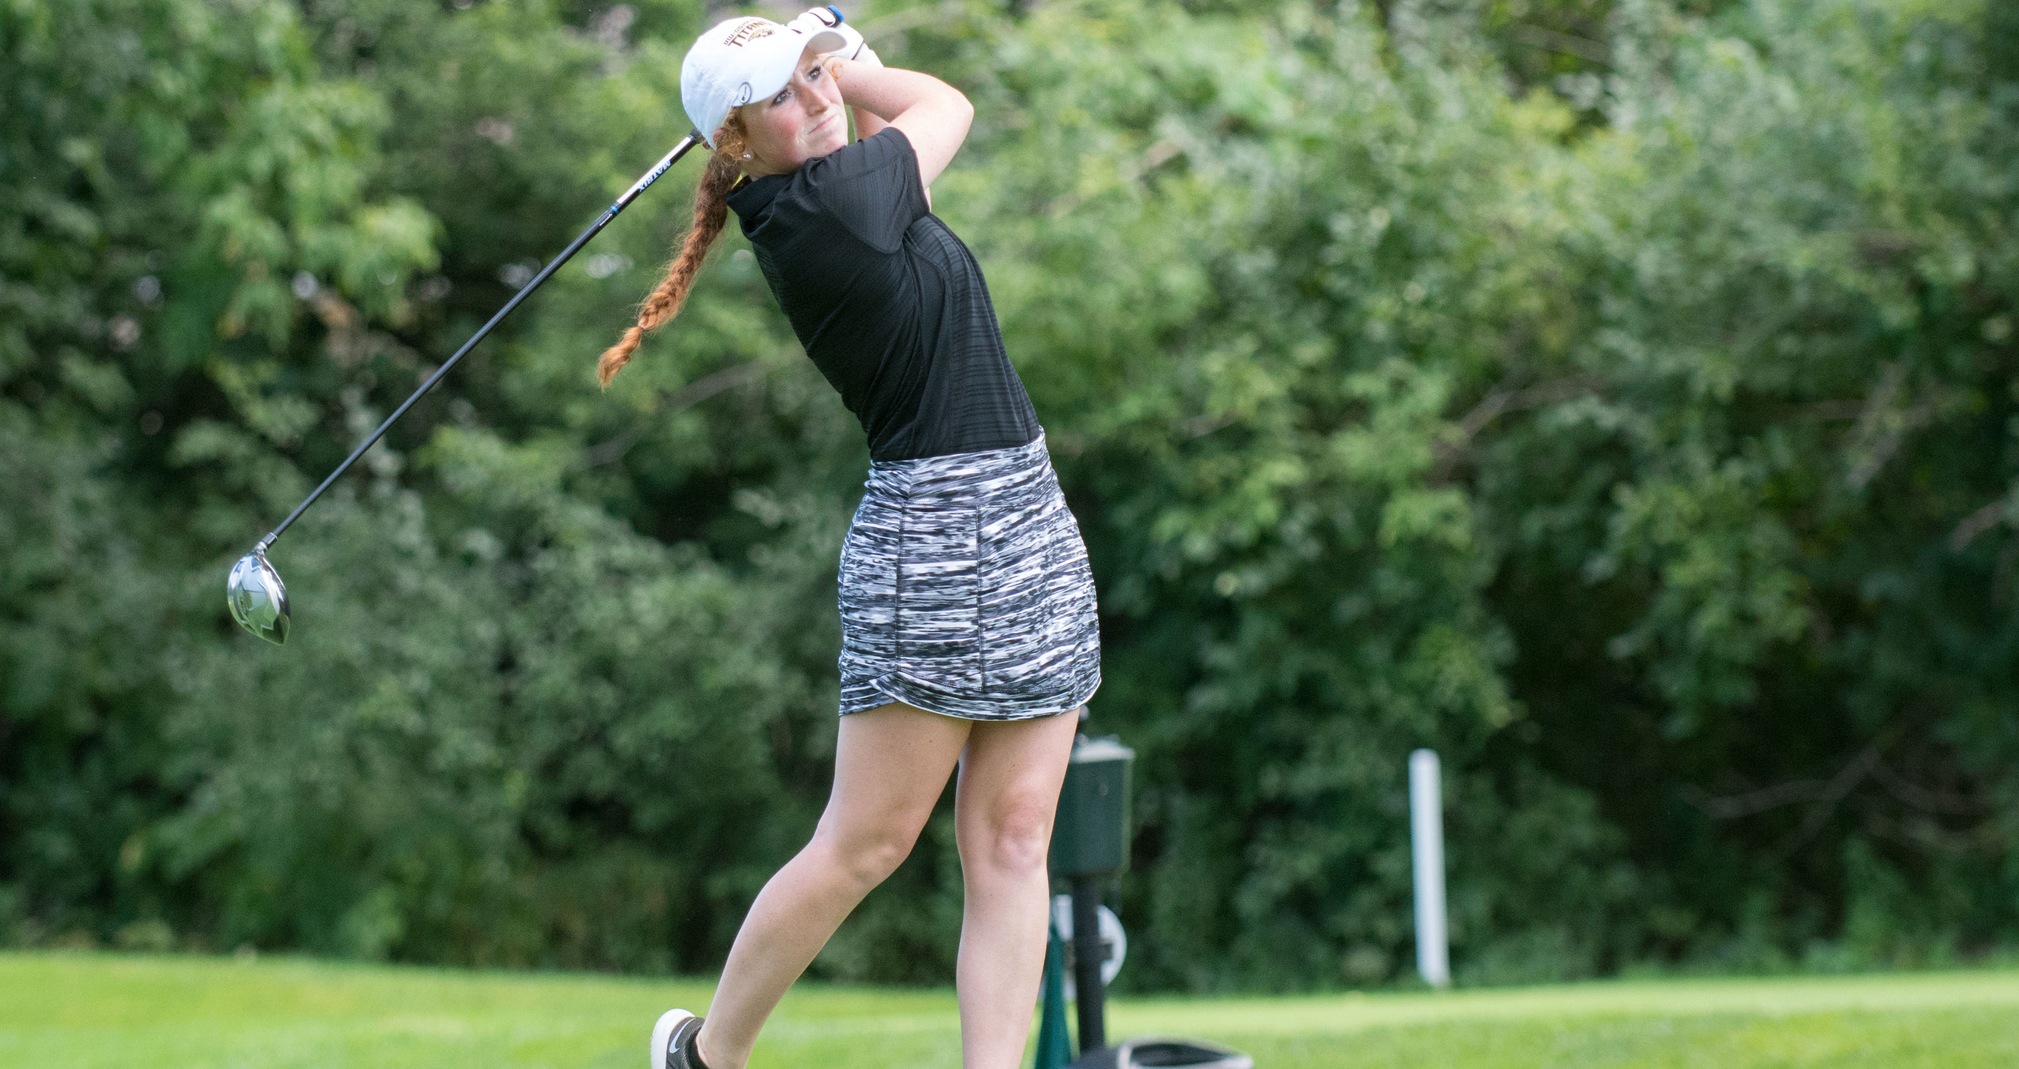 Micayla Richards shared 14th place among the 118 golfers at the Wartburg College Invitational.